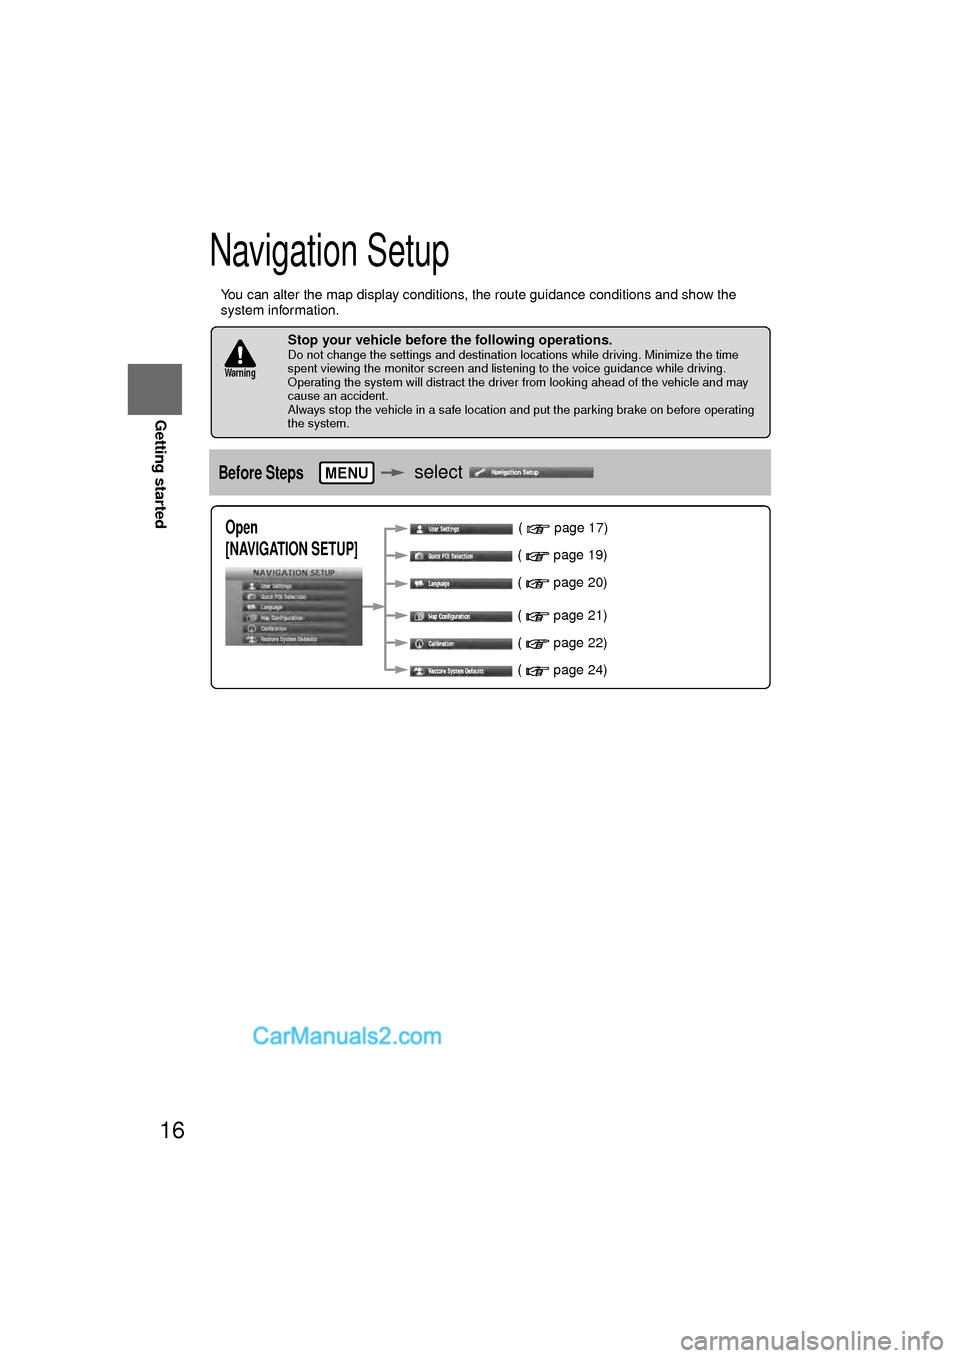 MAZDA MODEL CX-9 2010  Navigation Manual (in English) 16
RoutingAddress 
Book
Getting started
Navigation Setup
l
You can alter the map display conditions, the route guidance conditions and show the 
system information.
nStop your vehicle before the follo